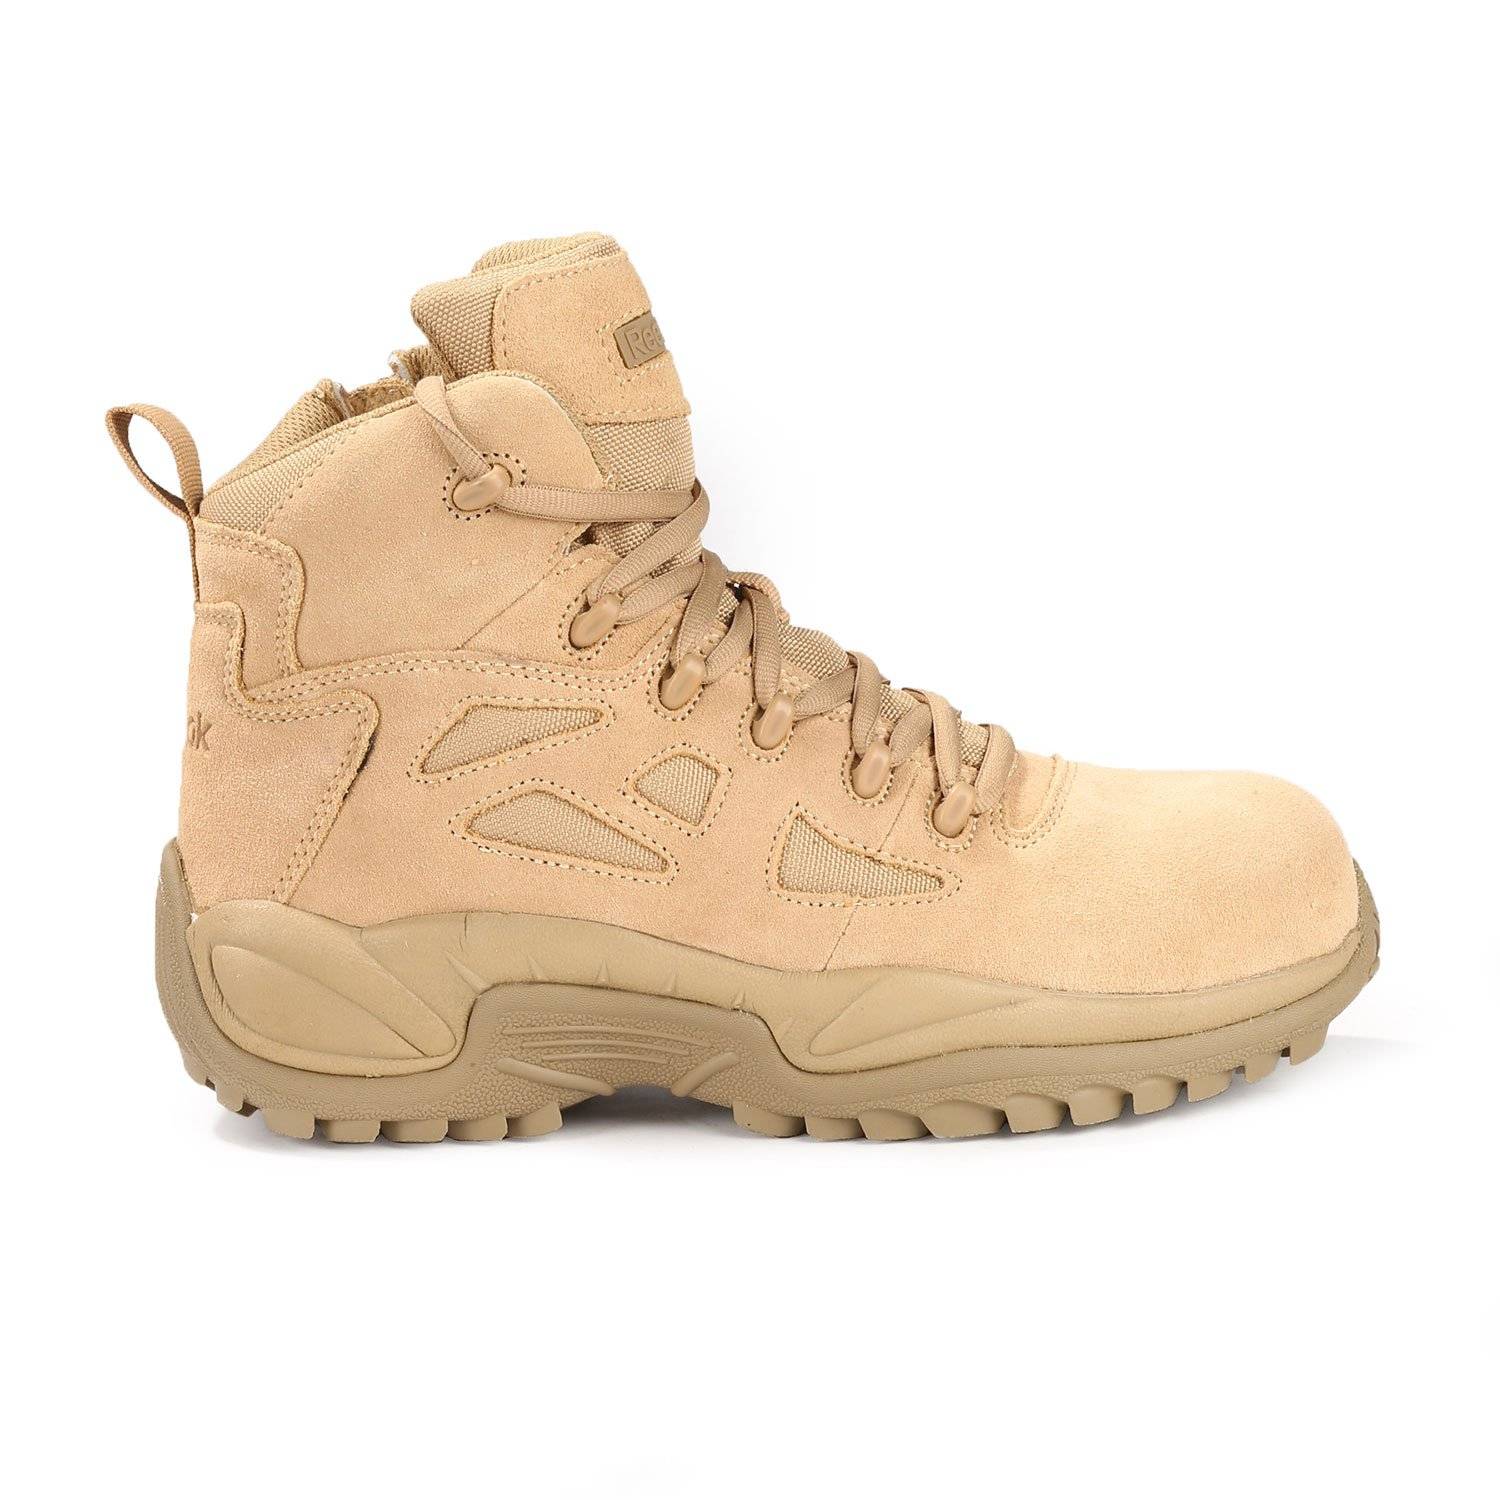 reebok composite toe safety boots